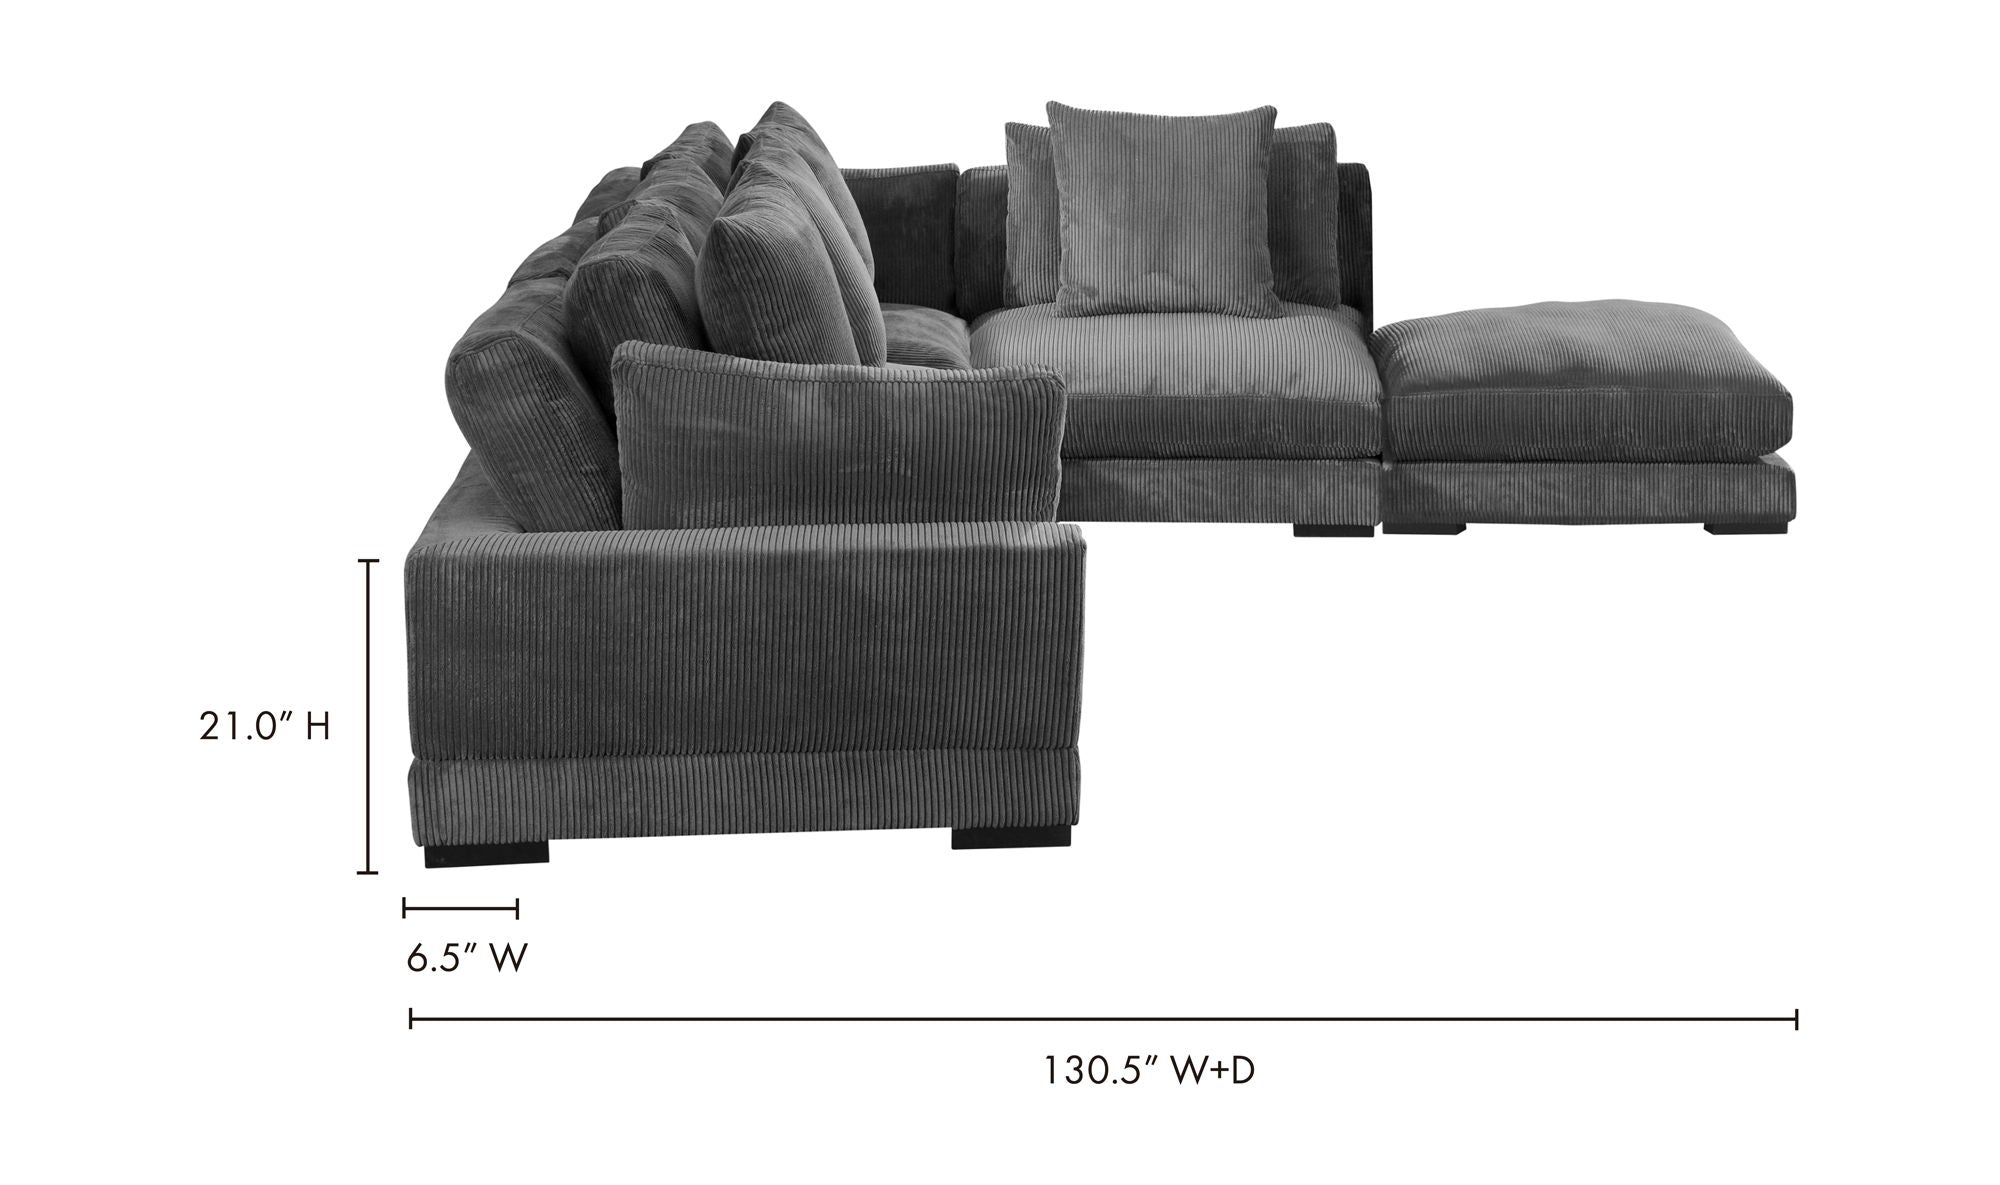 Charcoal Gray Corduroy Modular Sectional - Tumble Dream-Stationary Sectionals-American Furniture Outlet